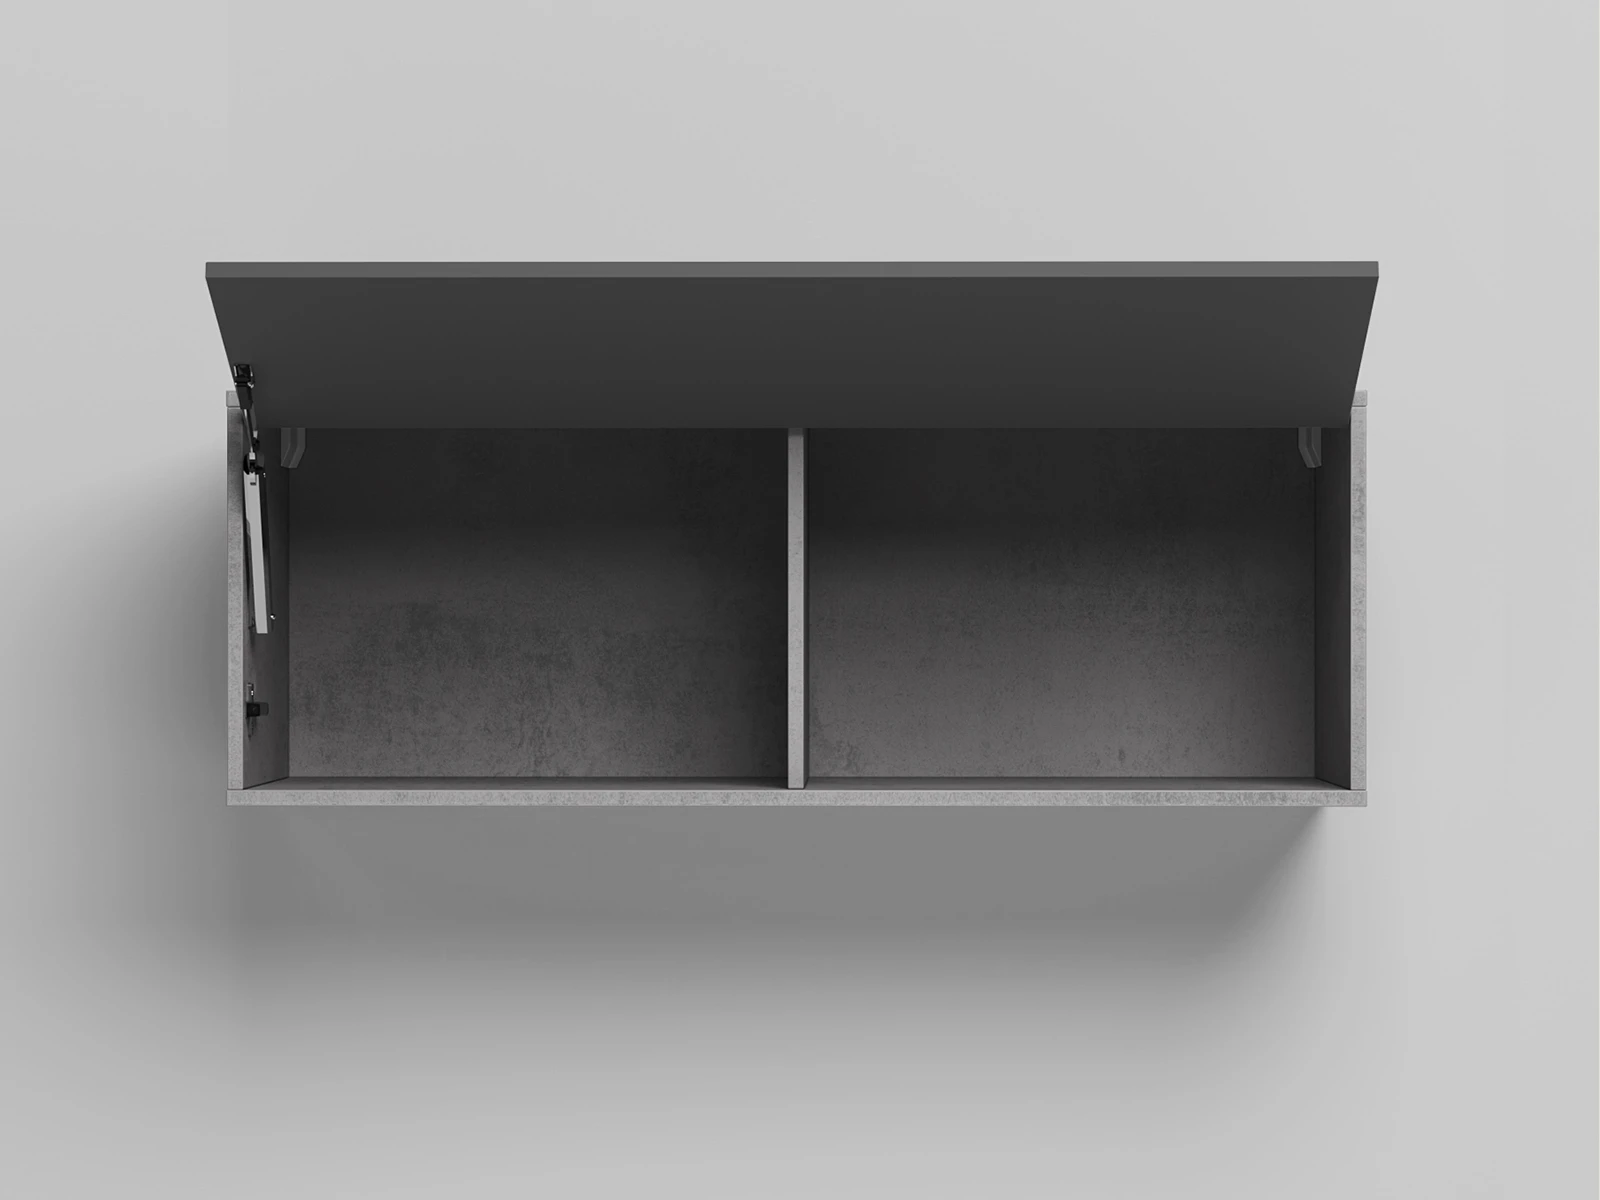 2 Wall cabinet - One door Concrete / Anthracite Gloss